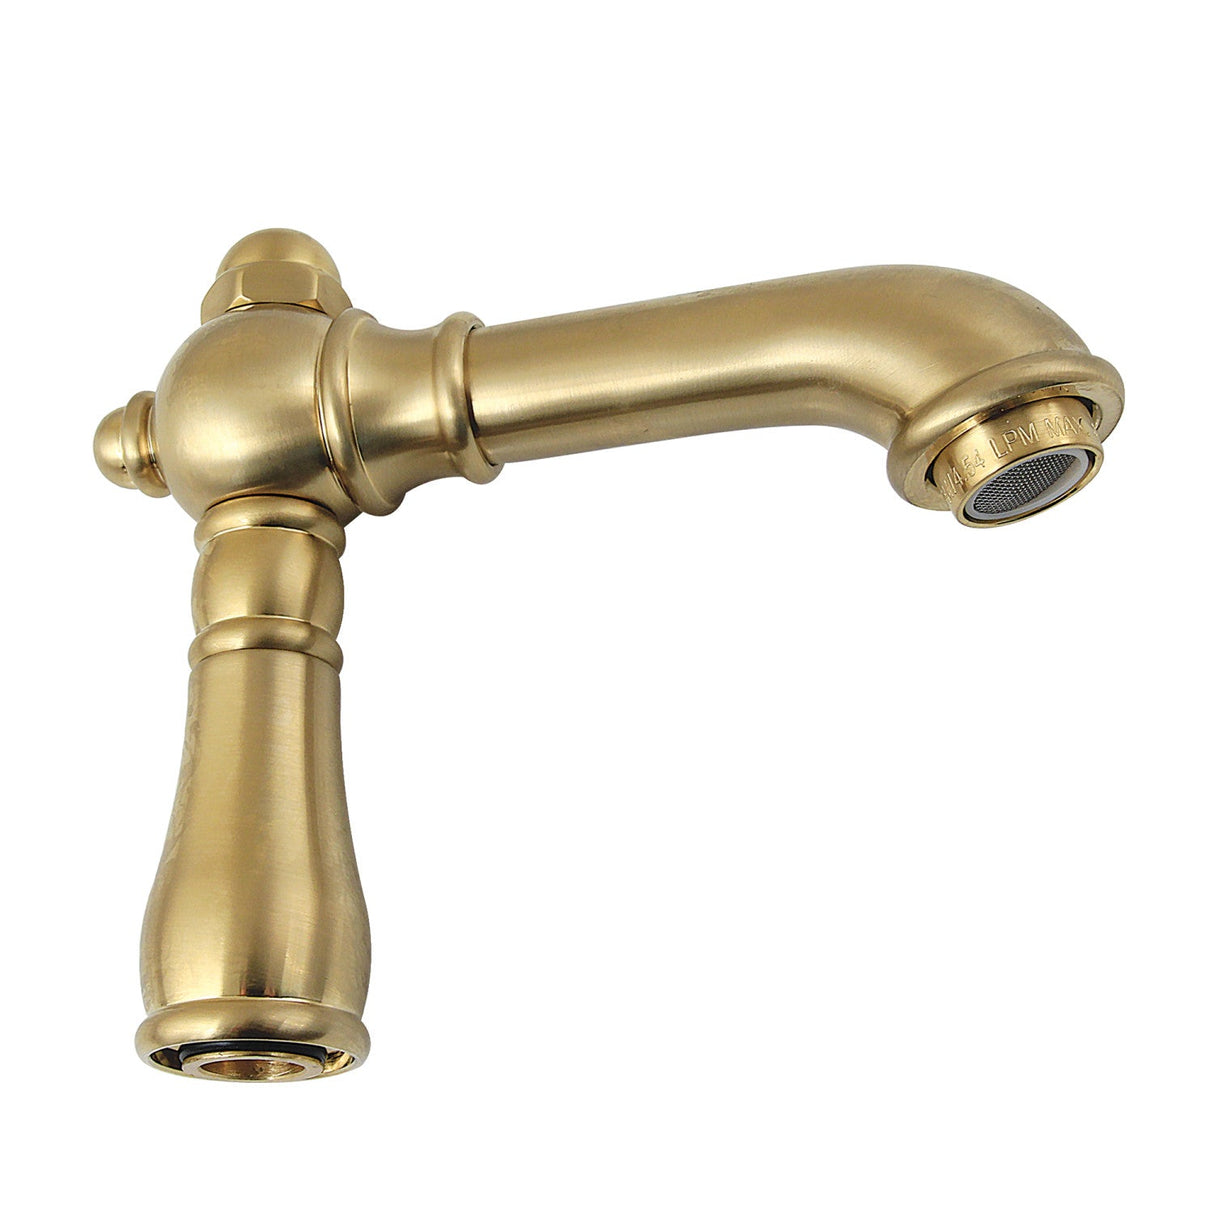 English Country KSP7257 4-1/2" Brass Faucet Spout, 1.2 GPM, Brushed Brass